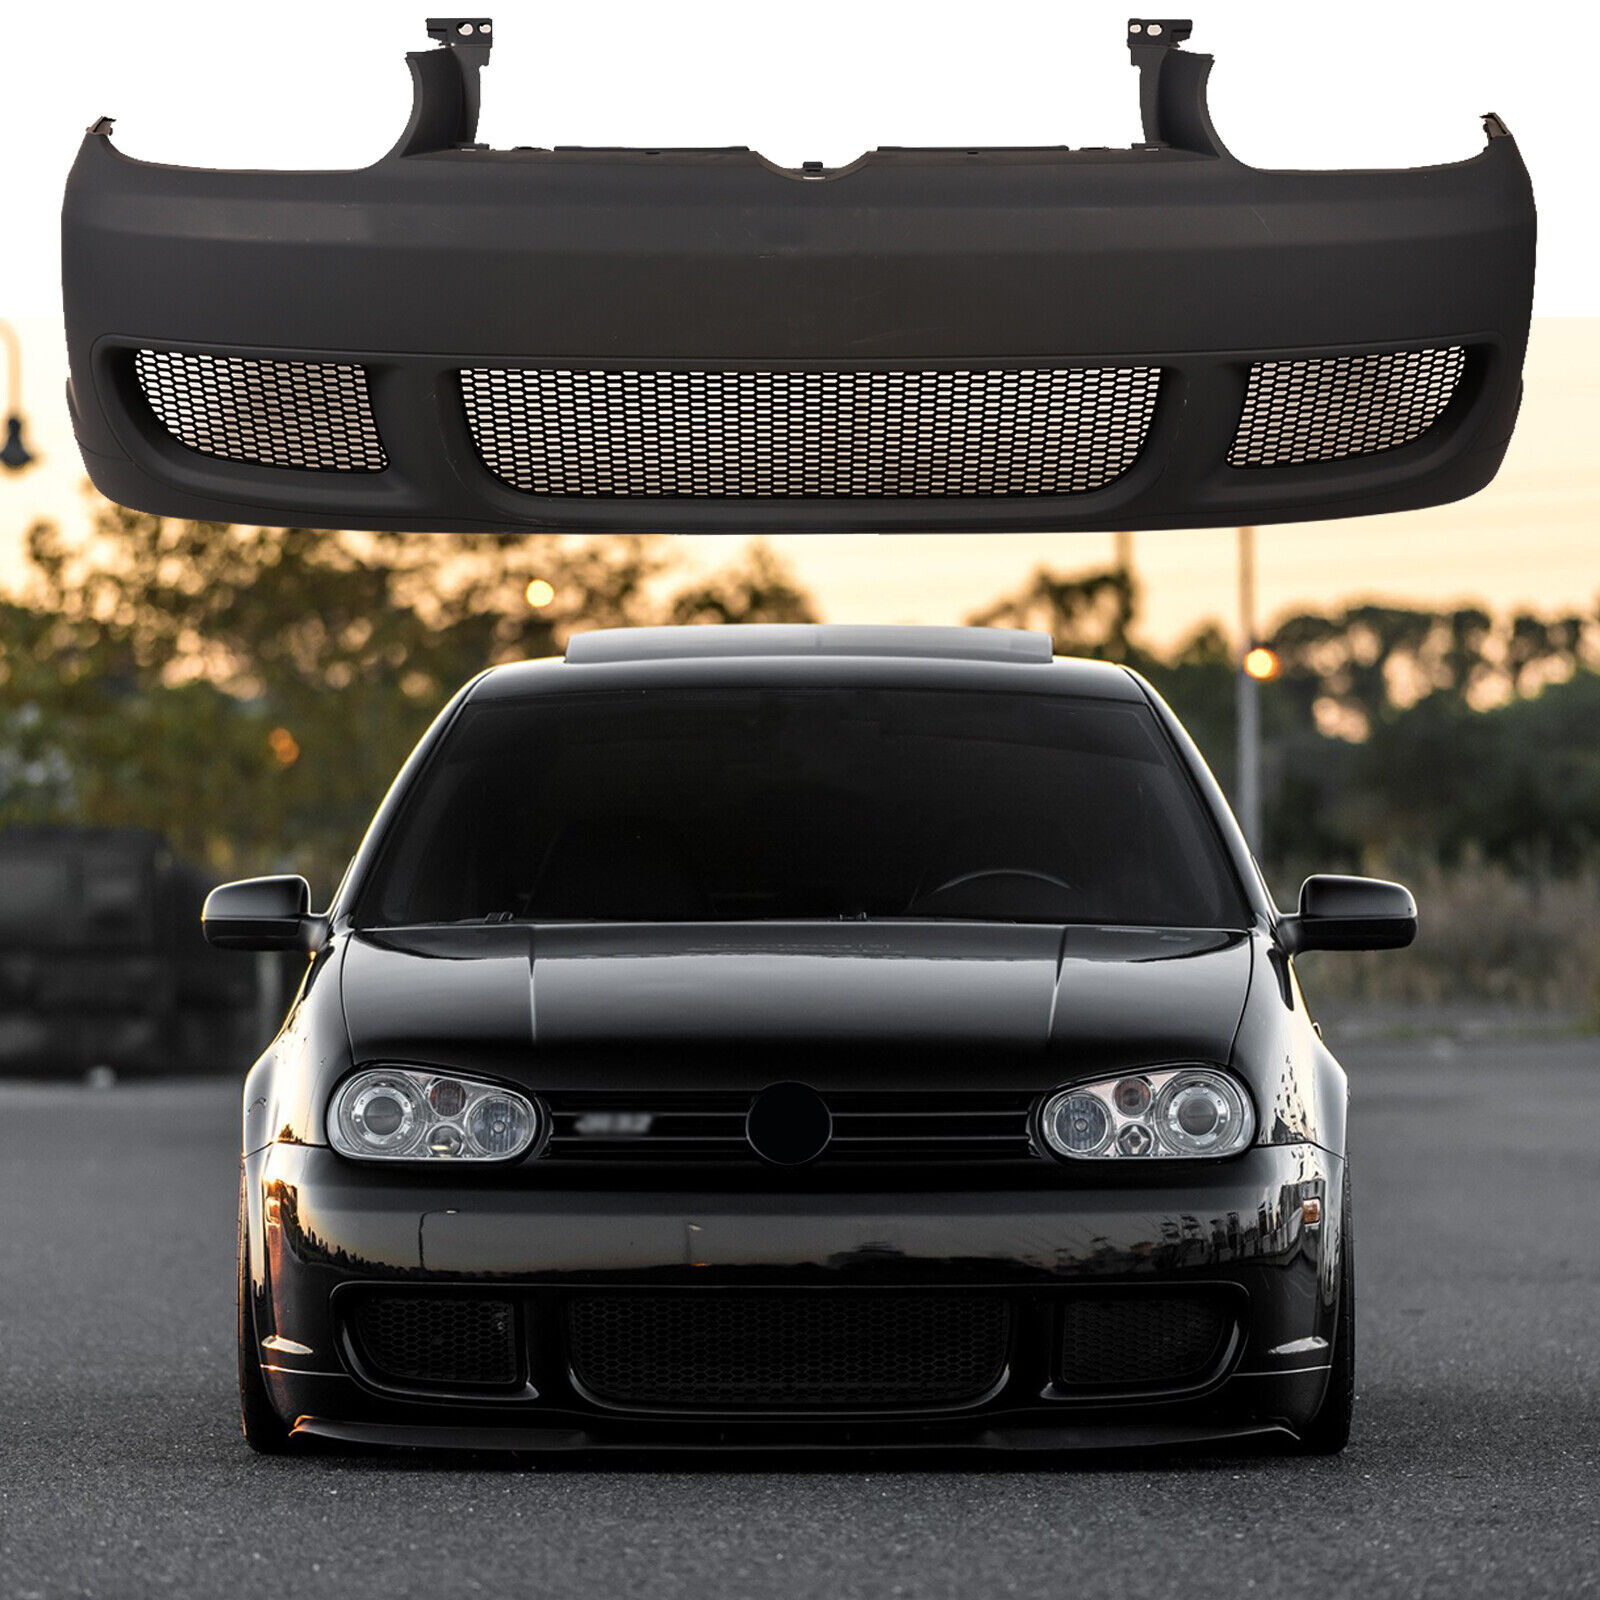 R32 style Front Bumper Cover W/ Black Mesh Grille fit 99-05 Volkswagen Golf MK4